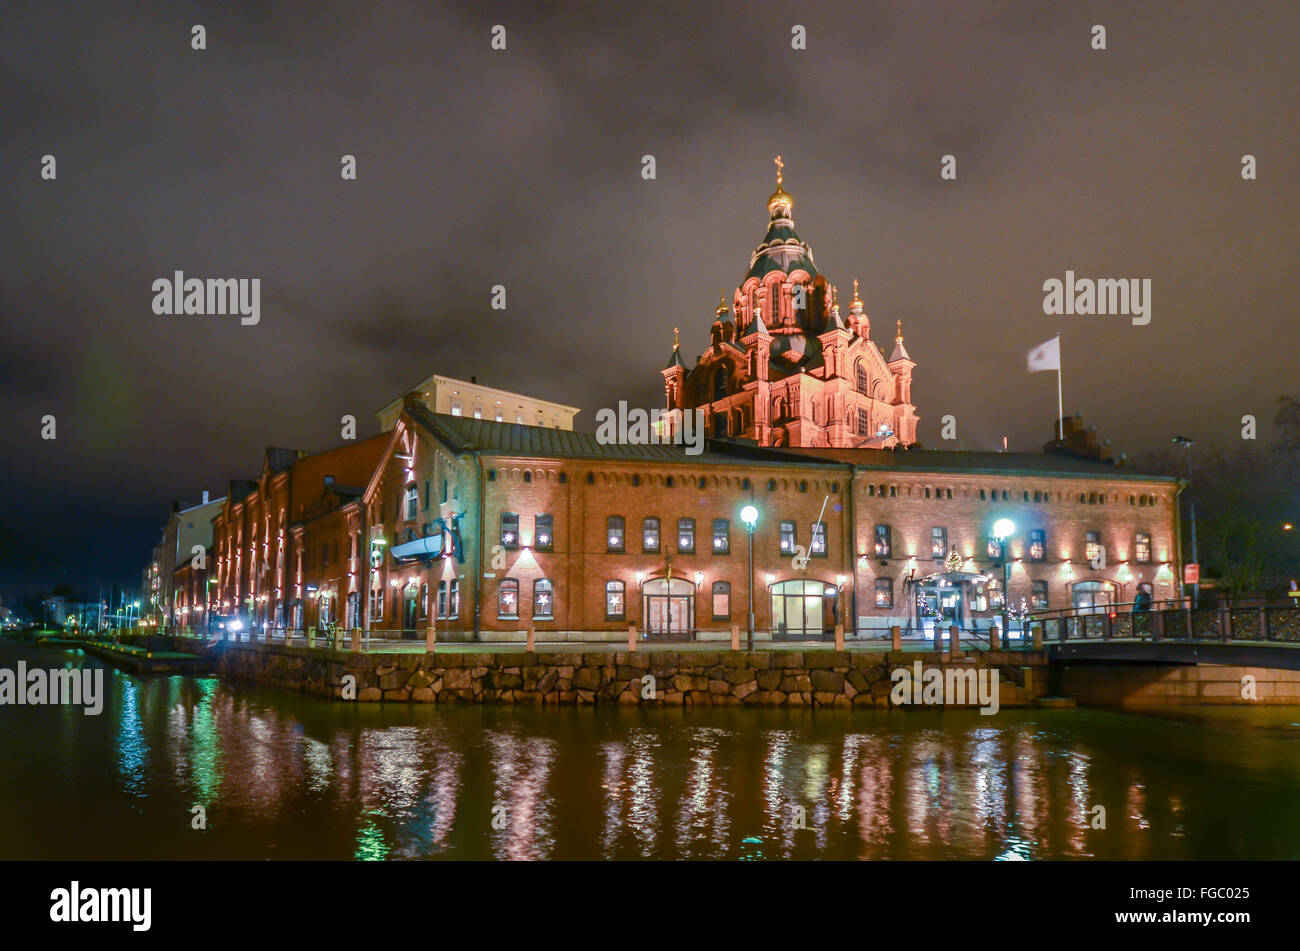 River In Front Of Illuminated Cathedral And Buildings Against Cloudy Sky Stock Photo